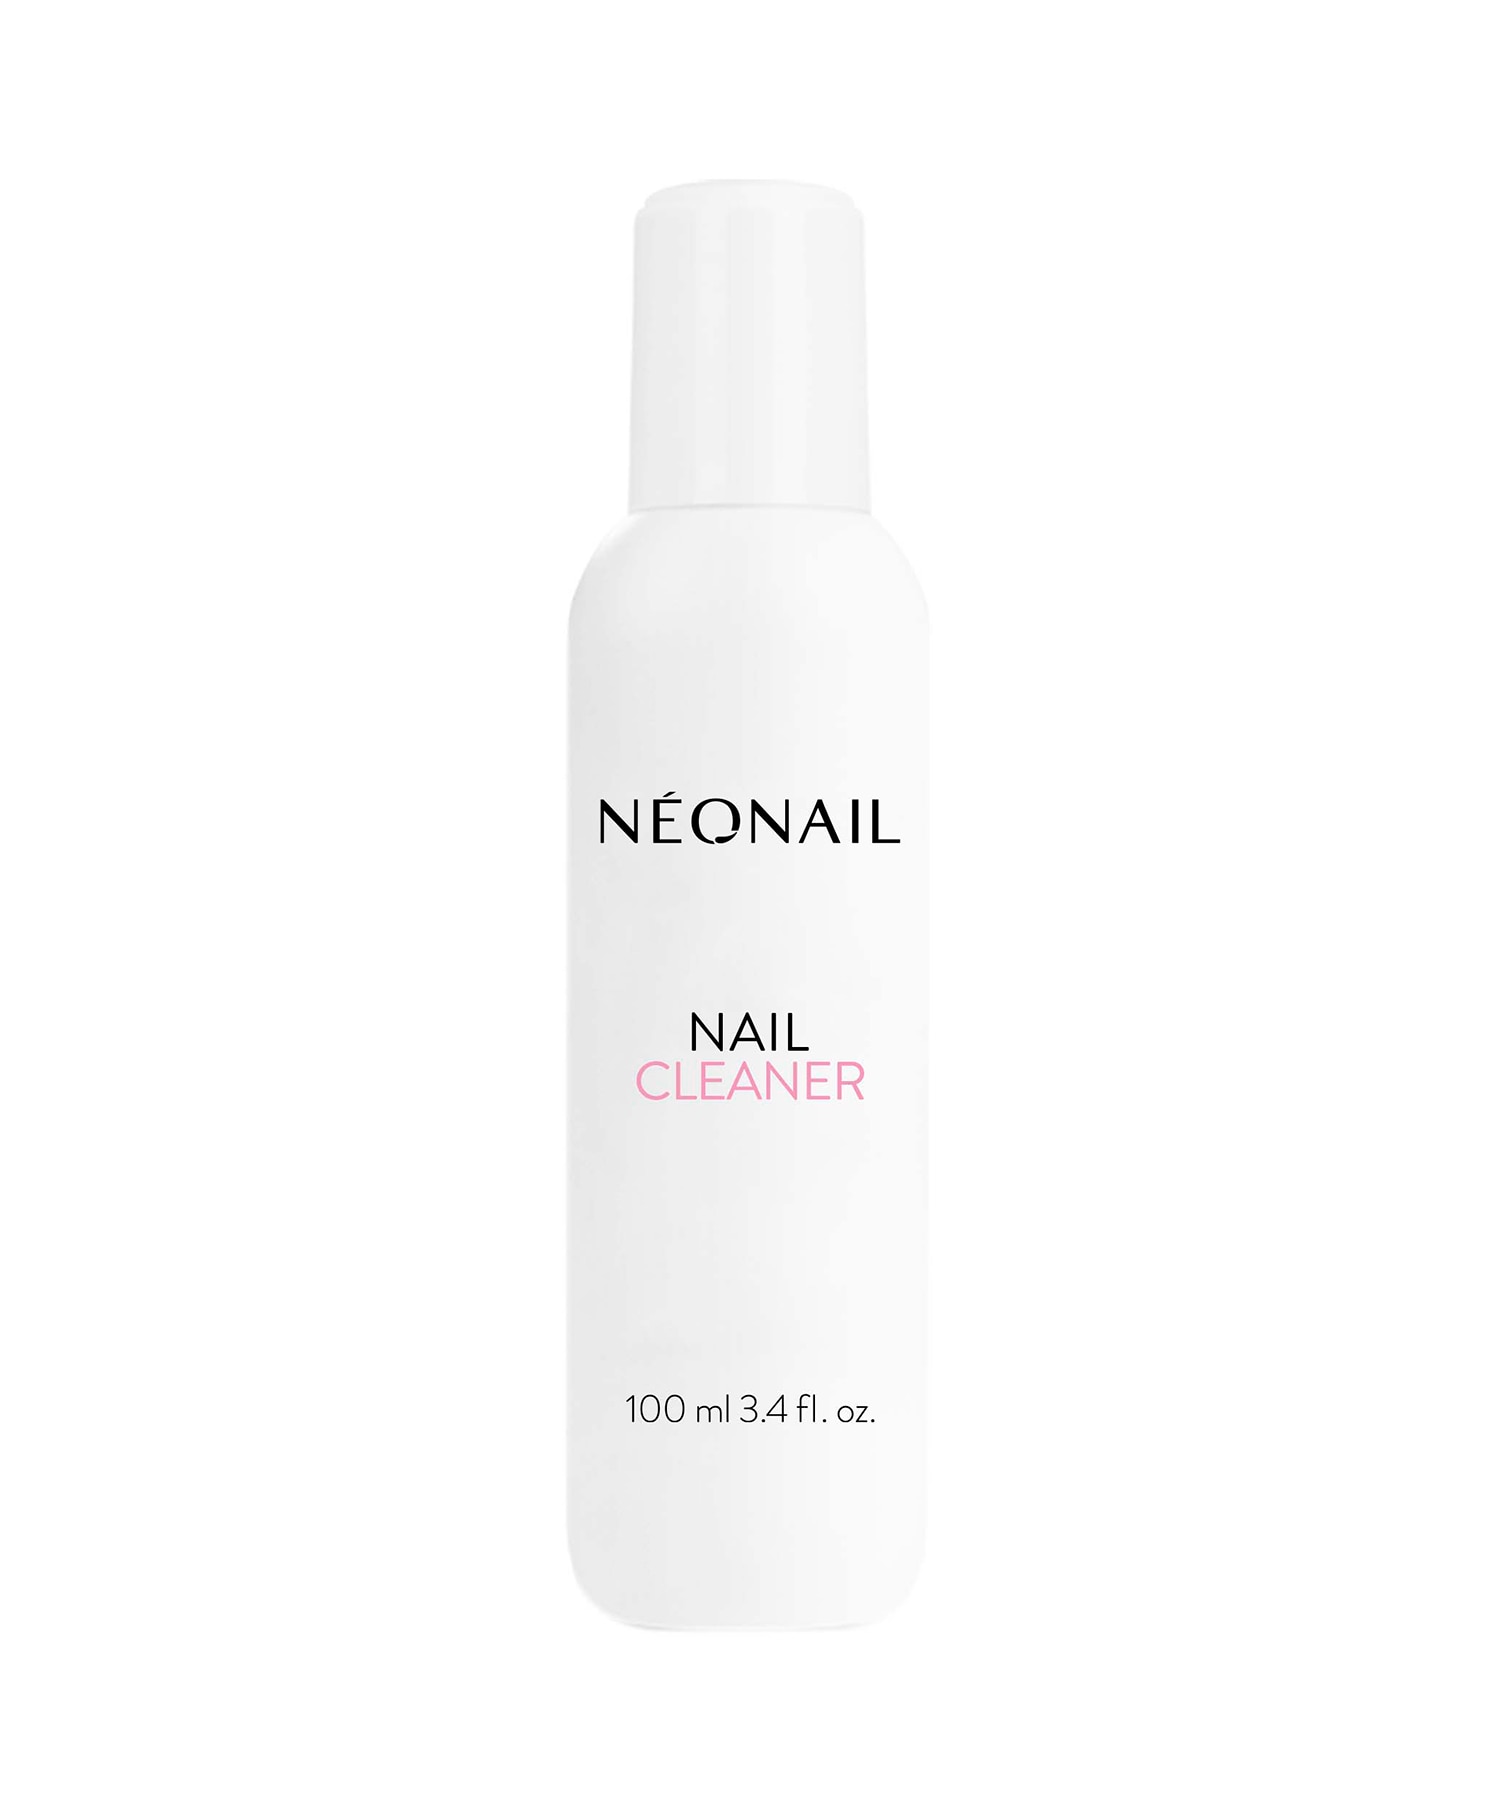 Neonail Nail Cleaner